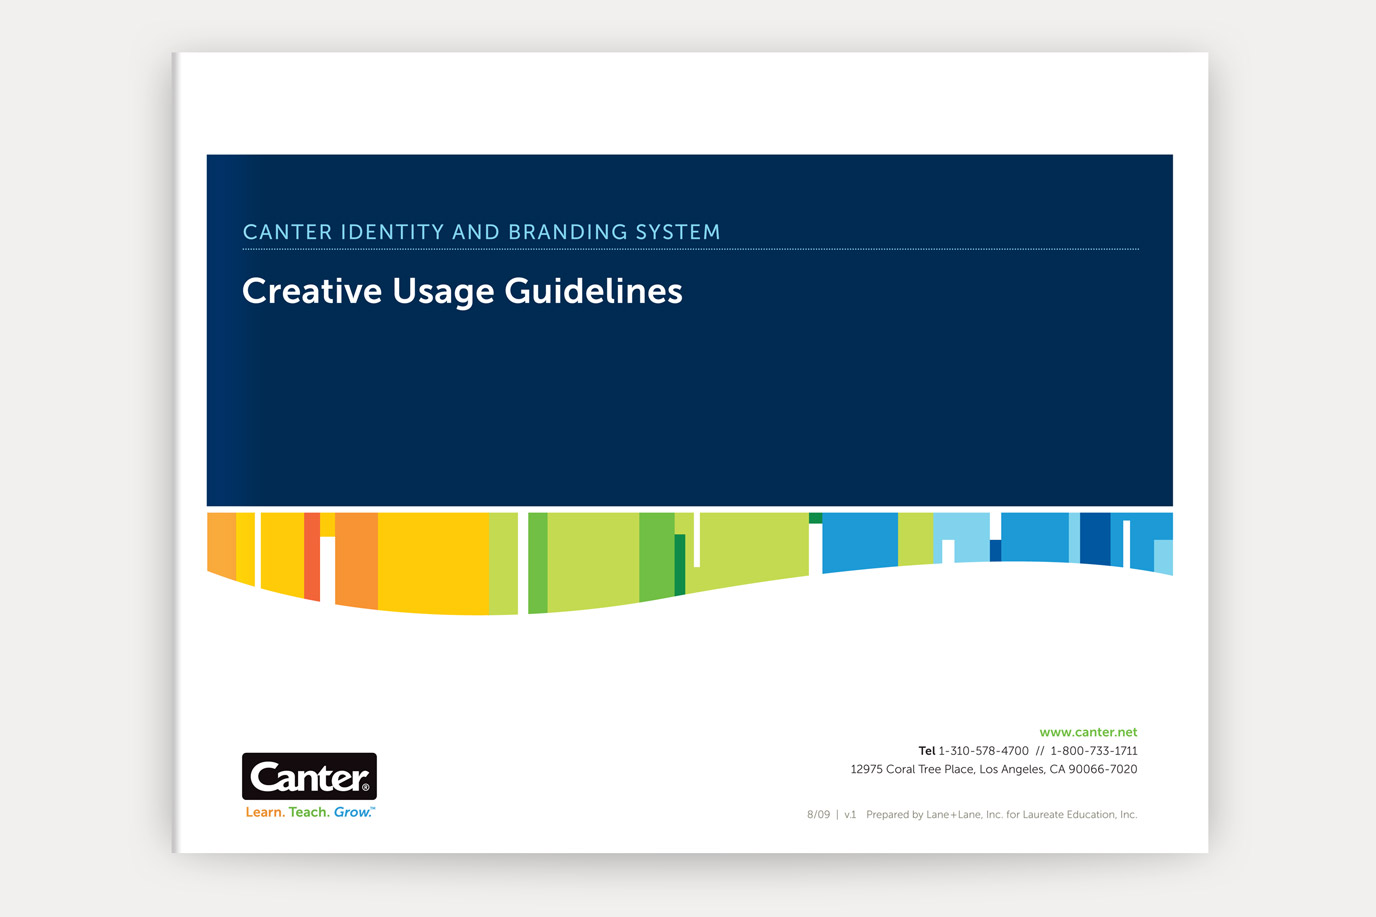 Canter Brand Usage Guidelines cover